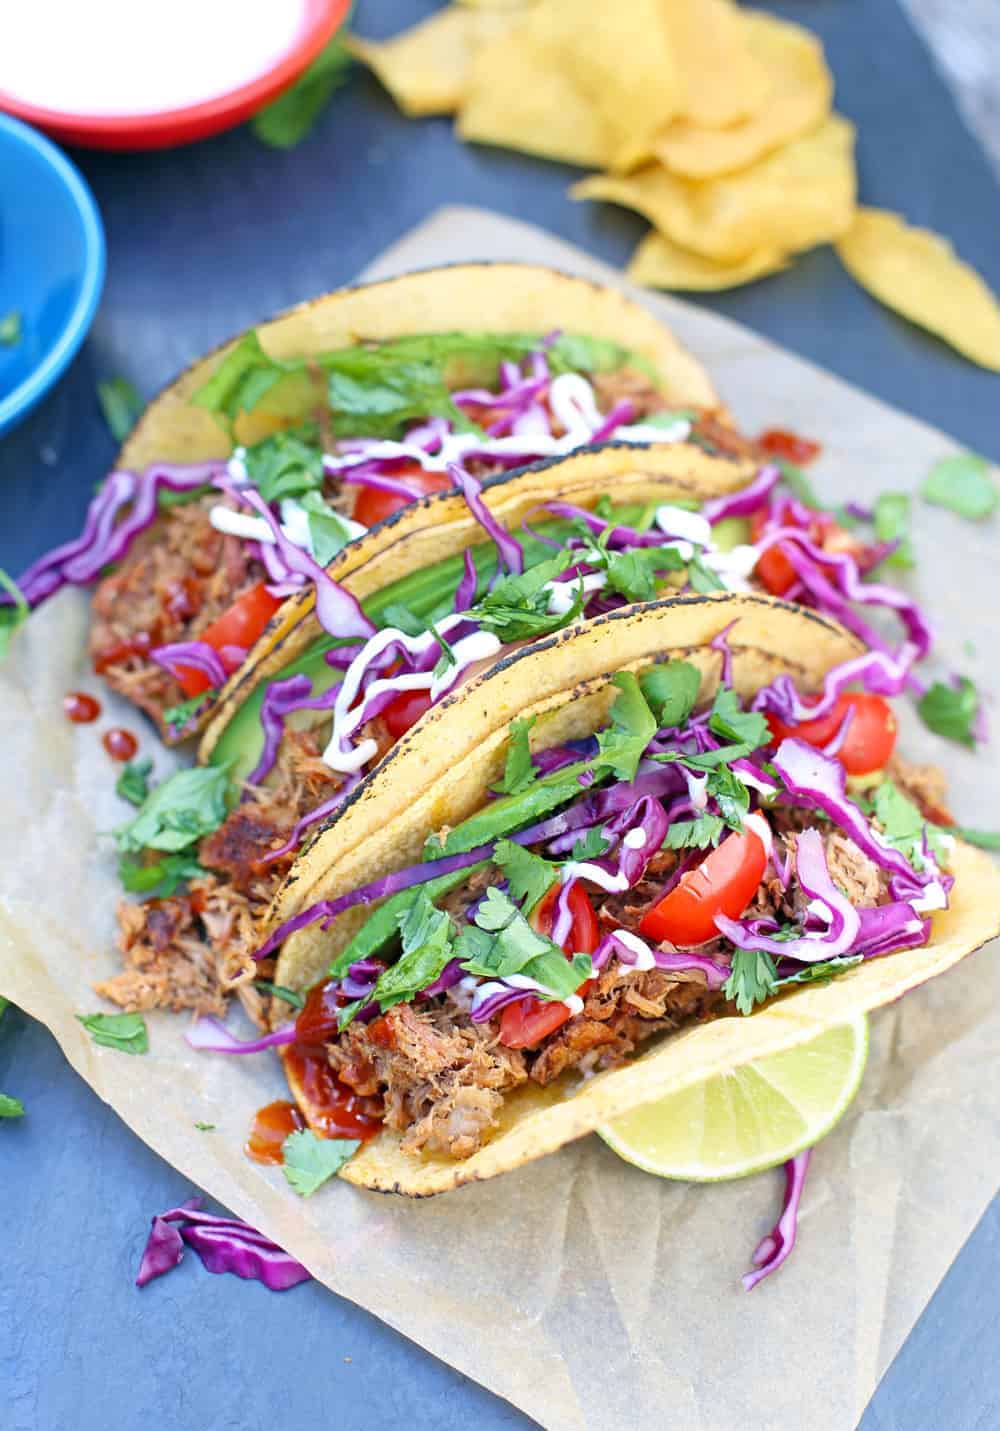 Three Smoked Pulled Pork Tacos made from leftover pulled pork. 